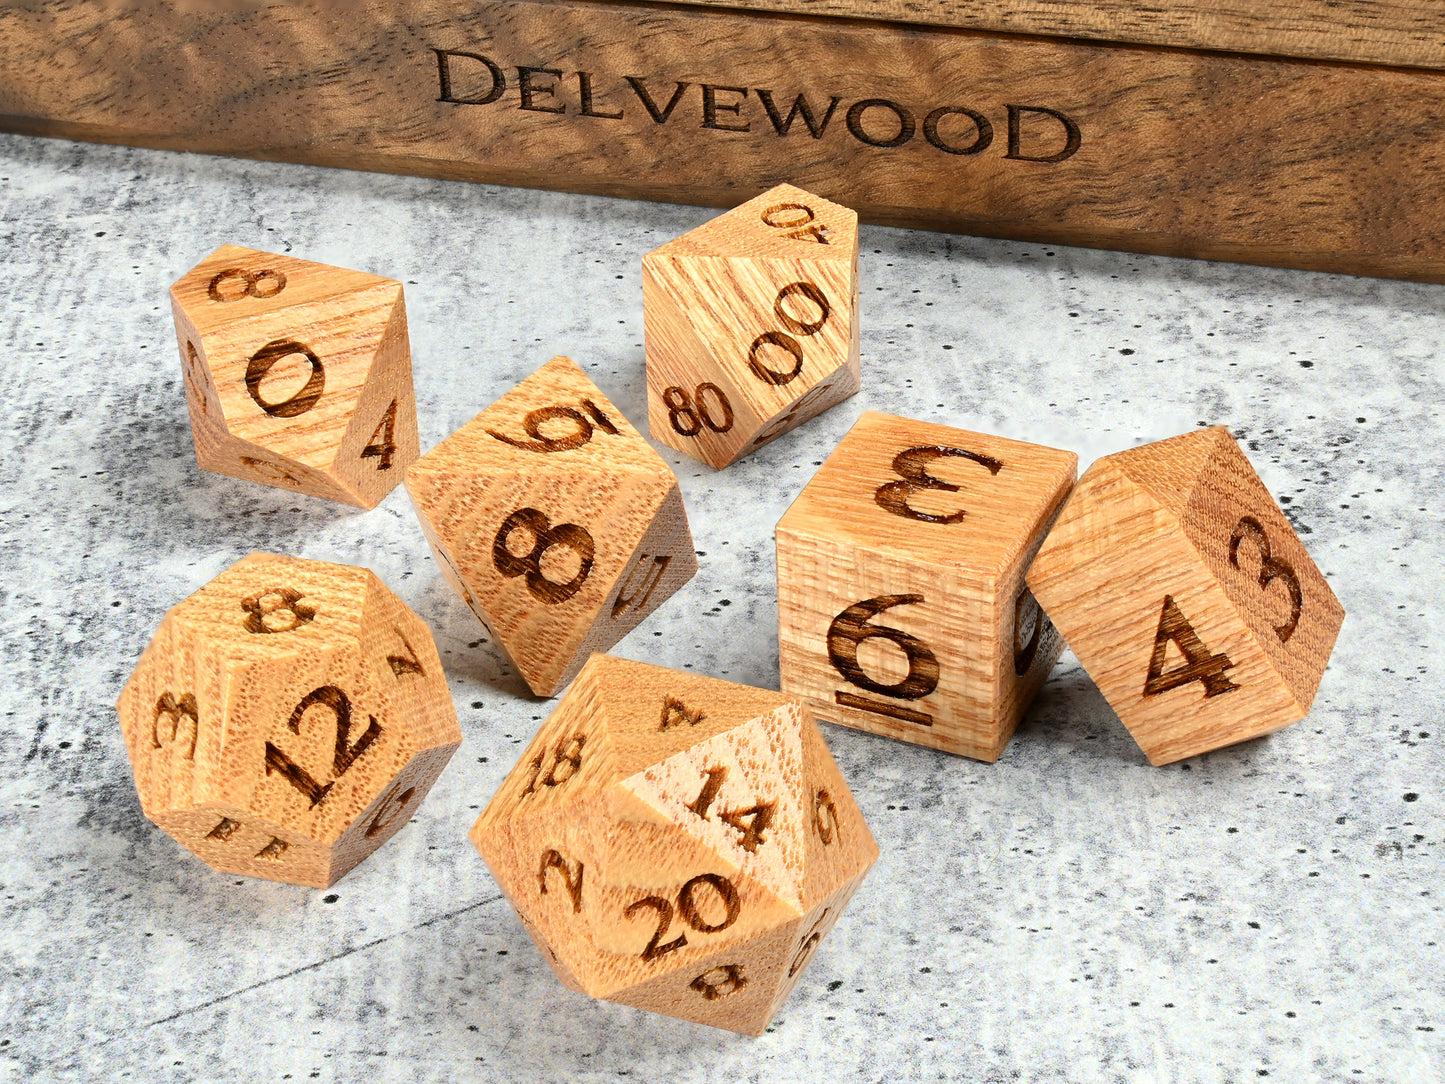 Coffeetree wood dice set for dnd rpg tabletop gaming in front of Delvewood delver's kit dice box.